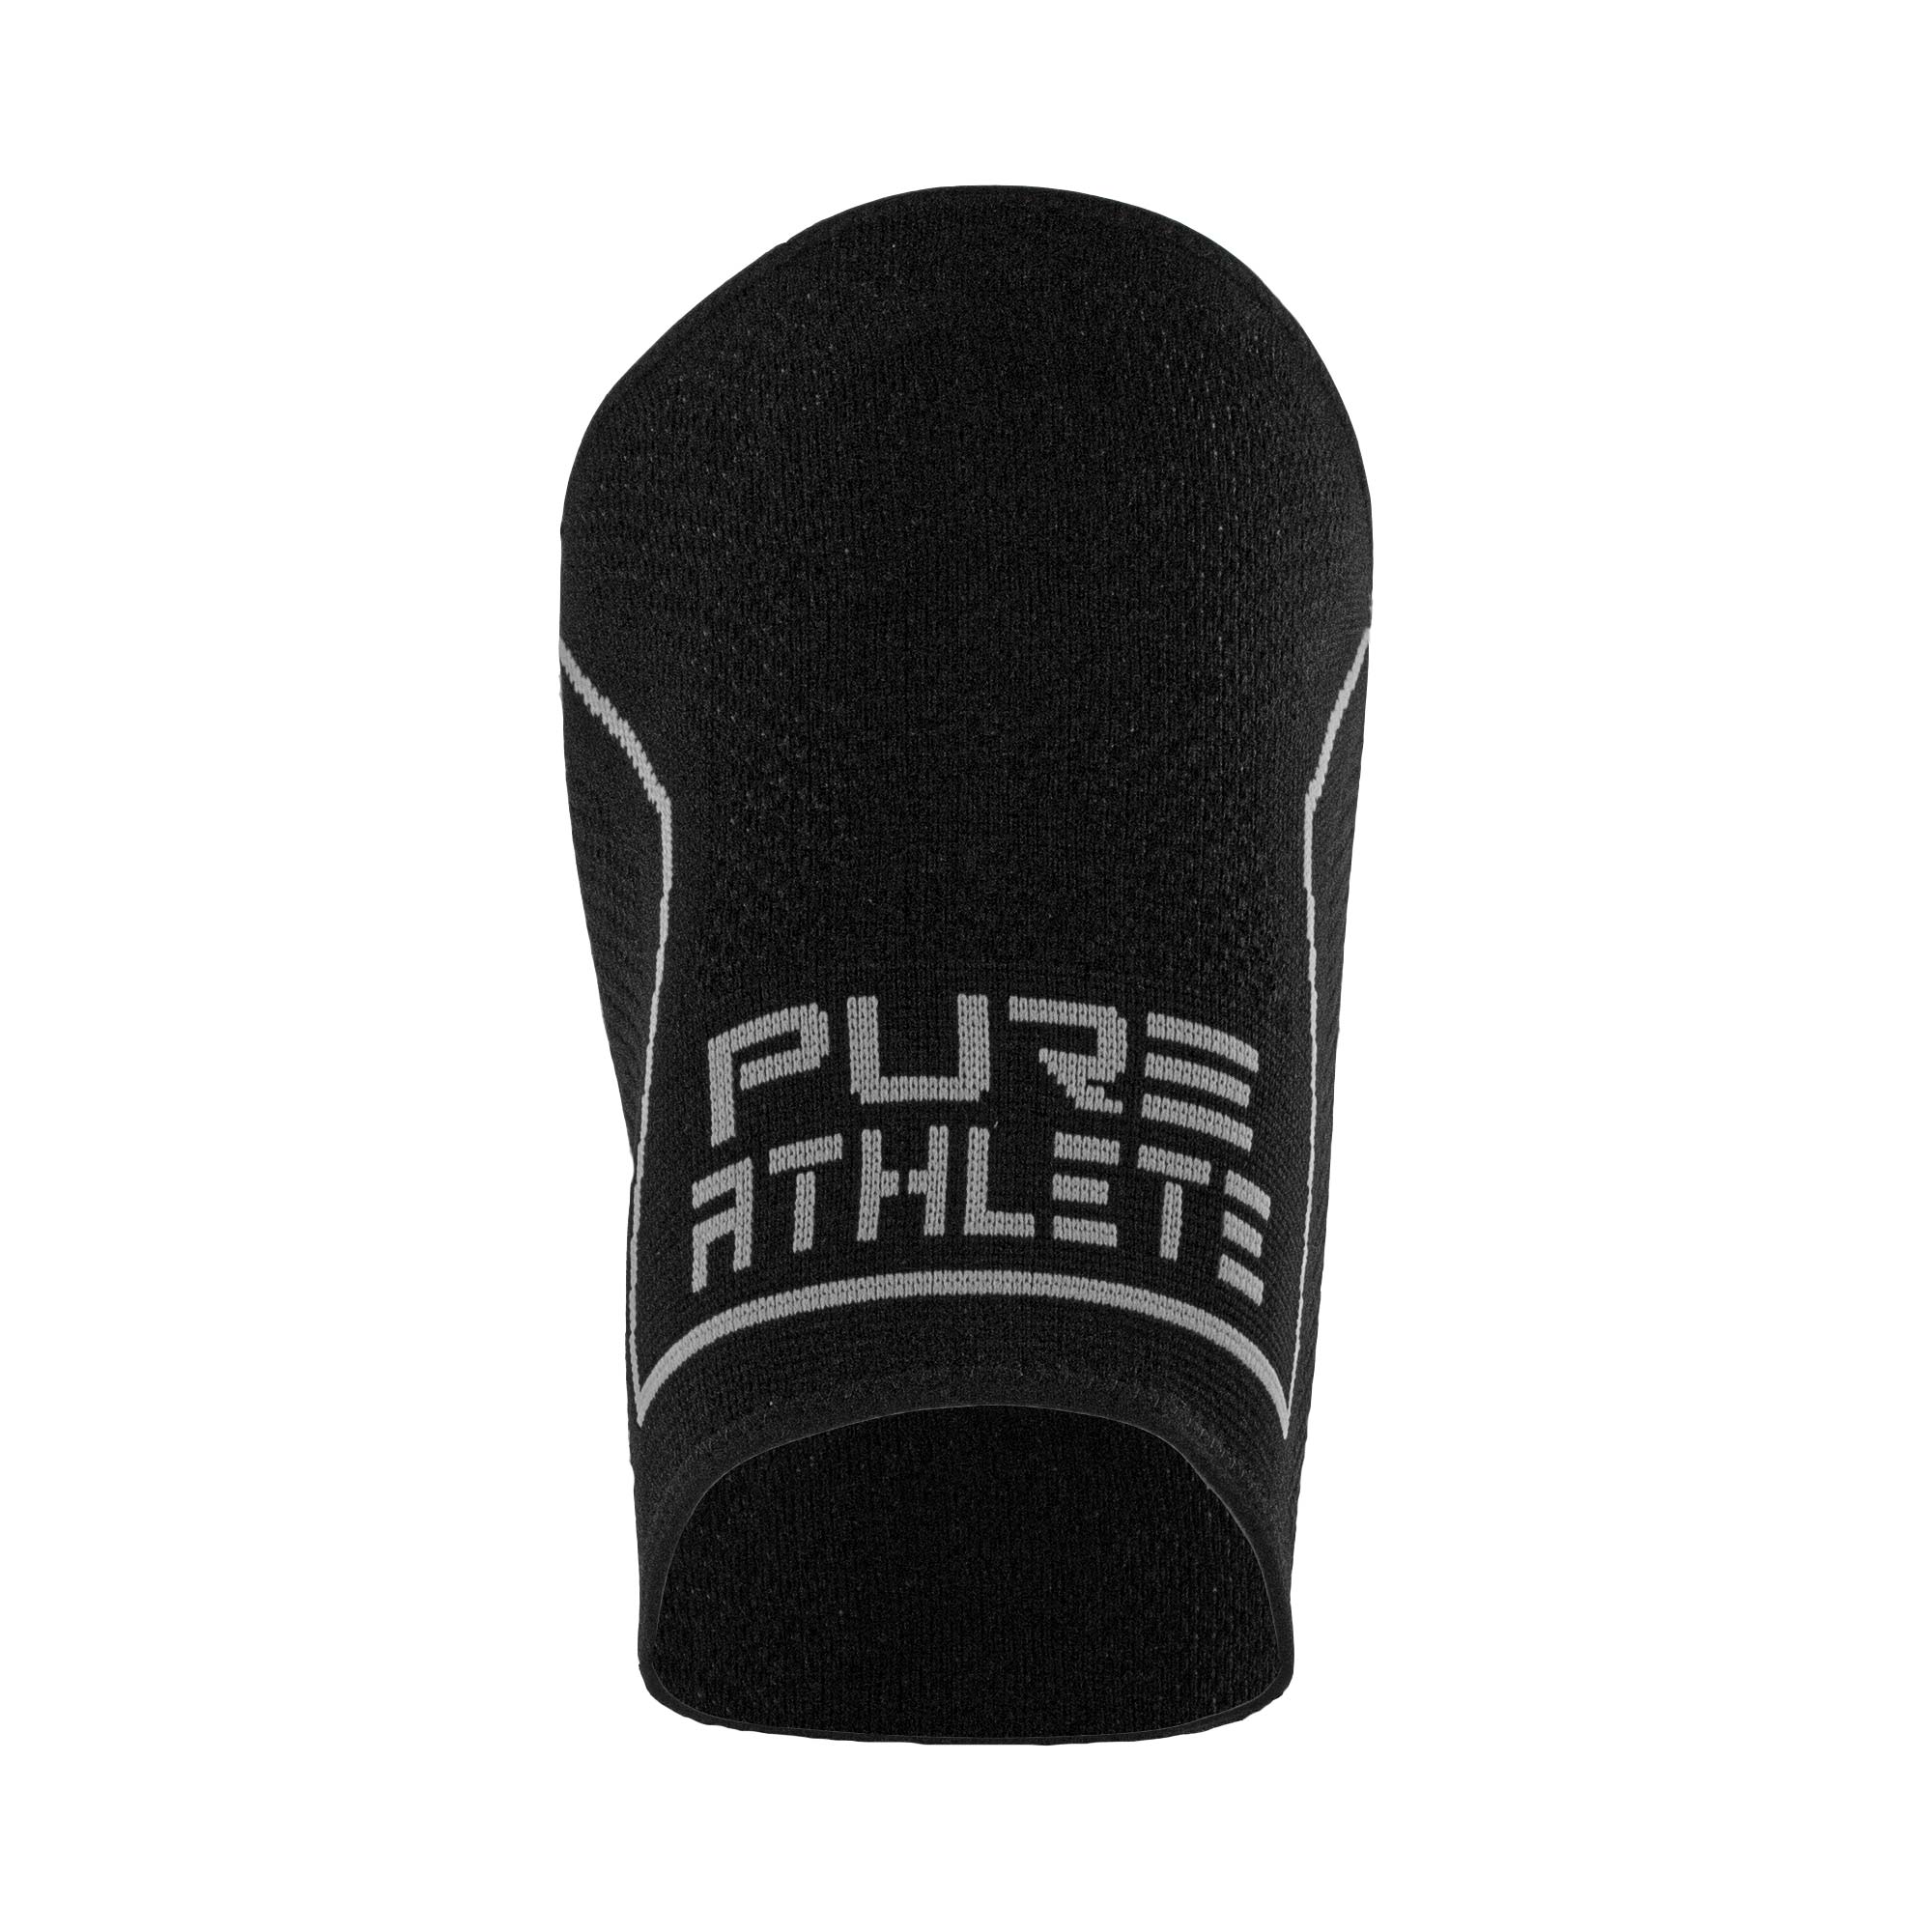 Technical Thigh Compression Sleeve